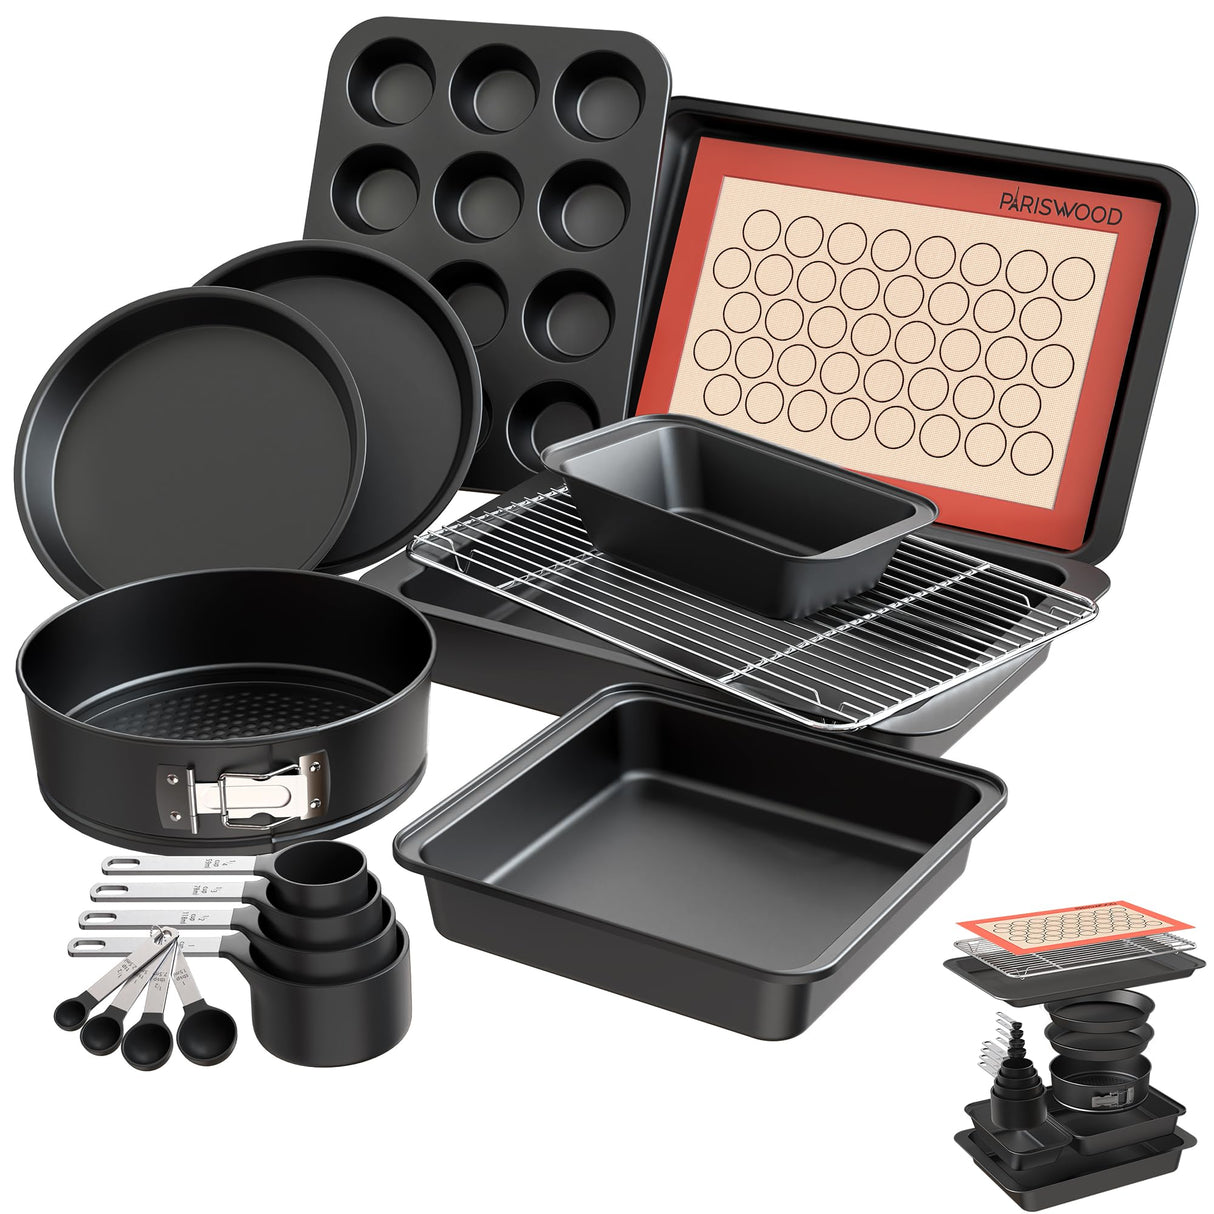 Premium 12 Piece Bakeware Sets | Carbon Steel, Non Stick & Oven Safe up to 500°F | Complete Baking Kit includes 9 Inch Round Cake Pans - Spring Form Pan - Cookie Sheets - Muffin Pan & much more